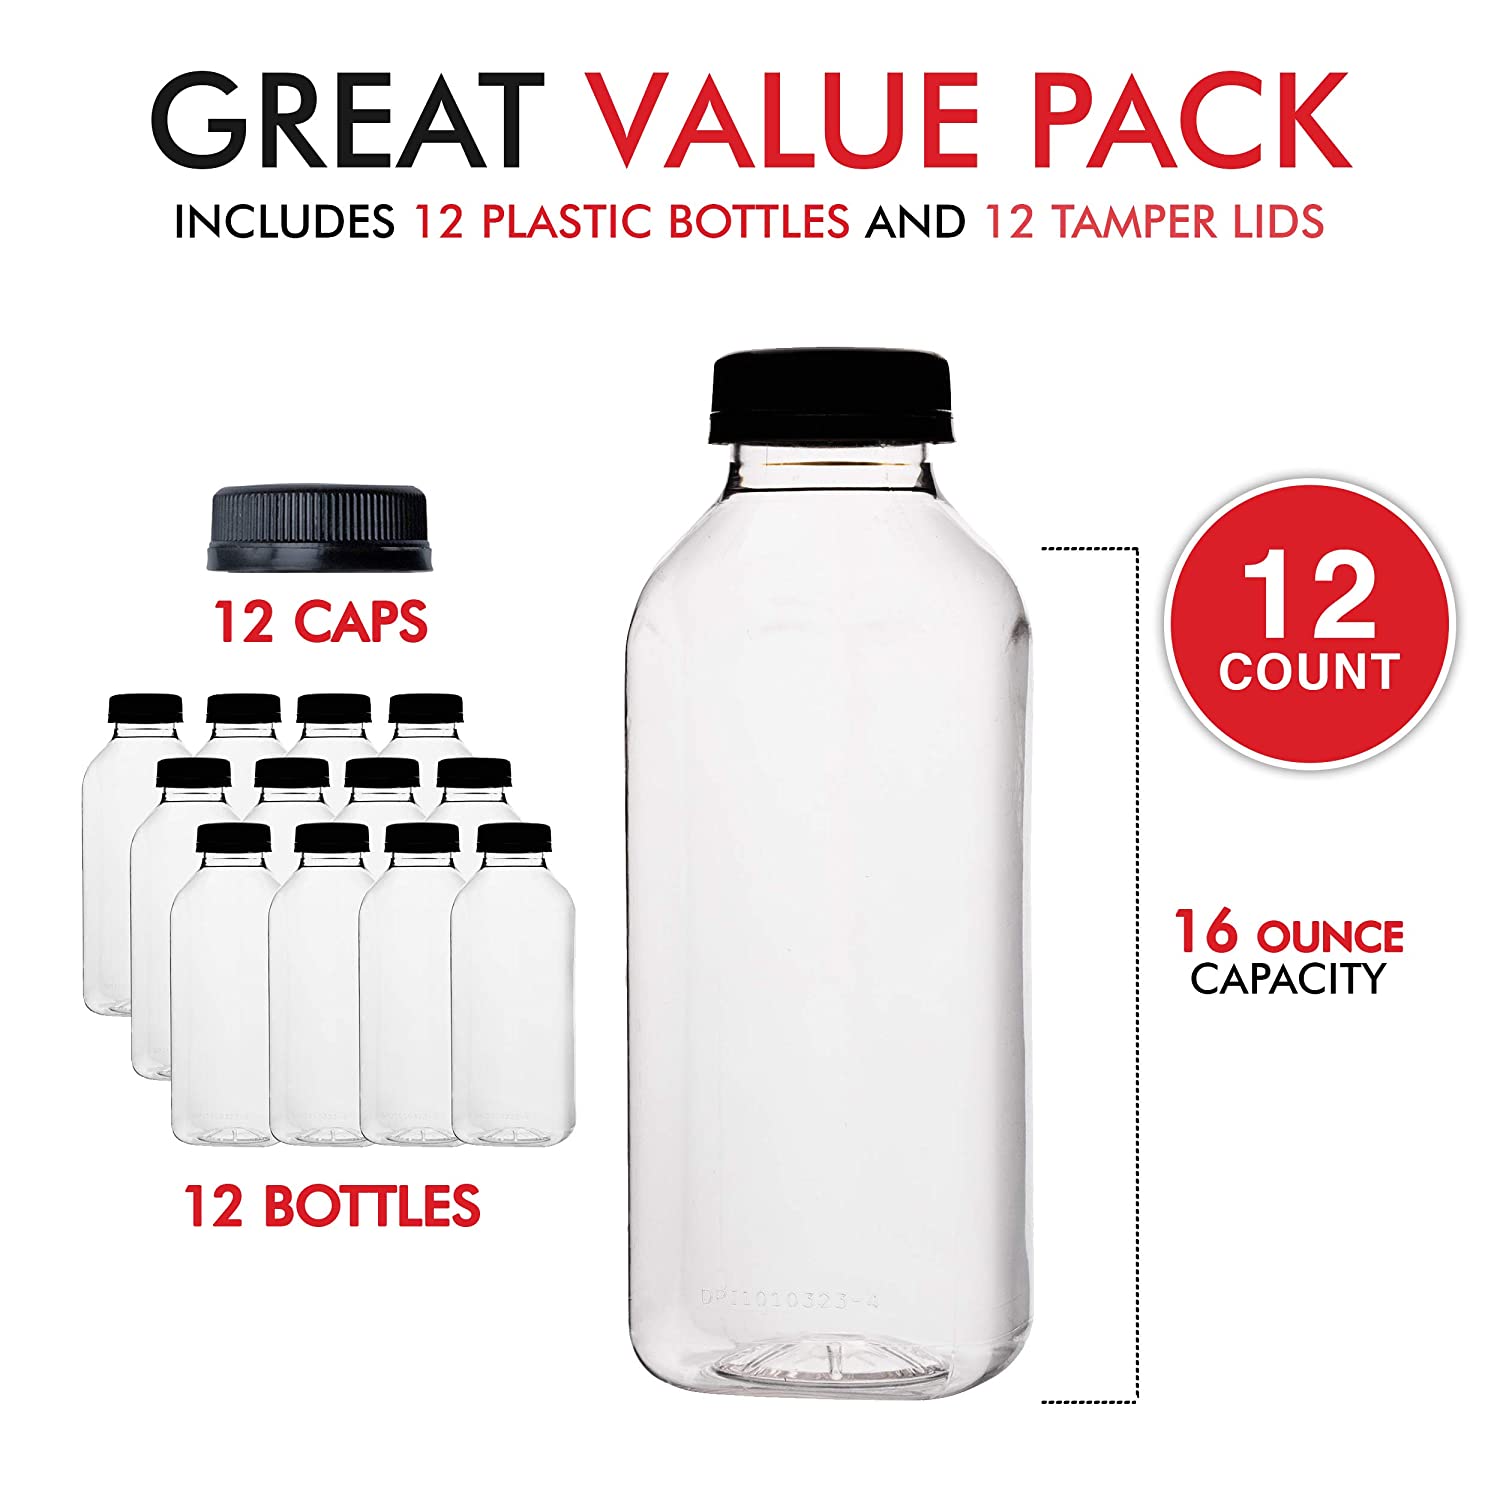 Plastic Juice Bottles with Lids, Juice Drink Containers with Caps for –  Stock Your Home